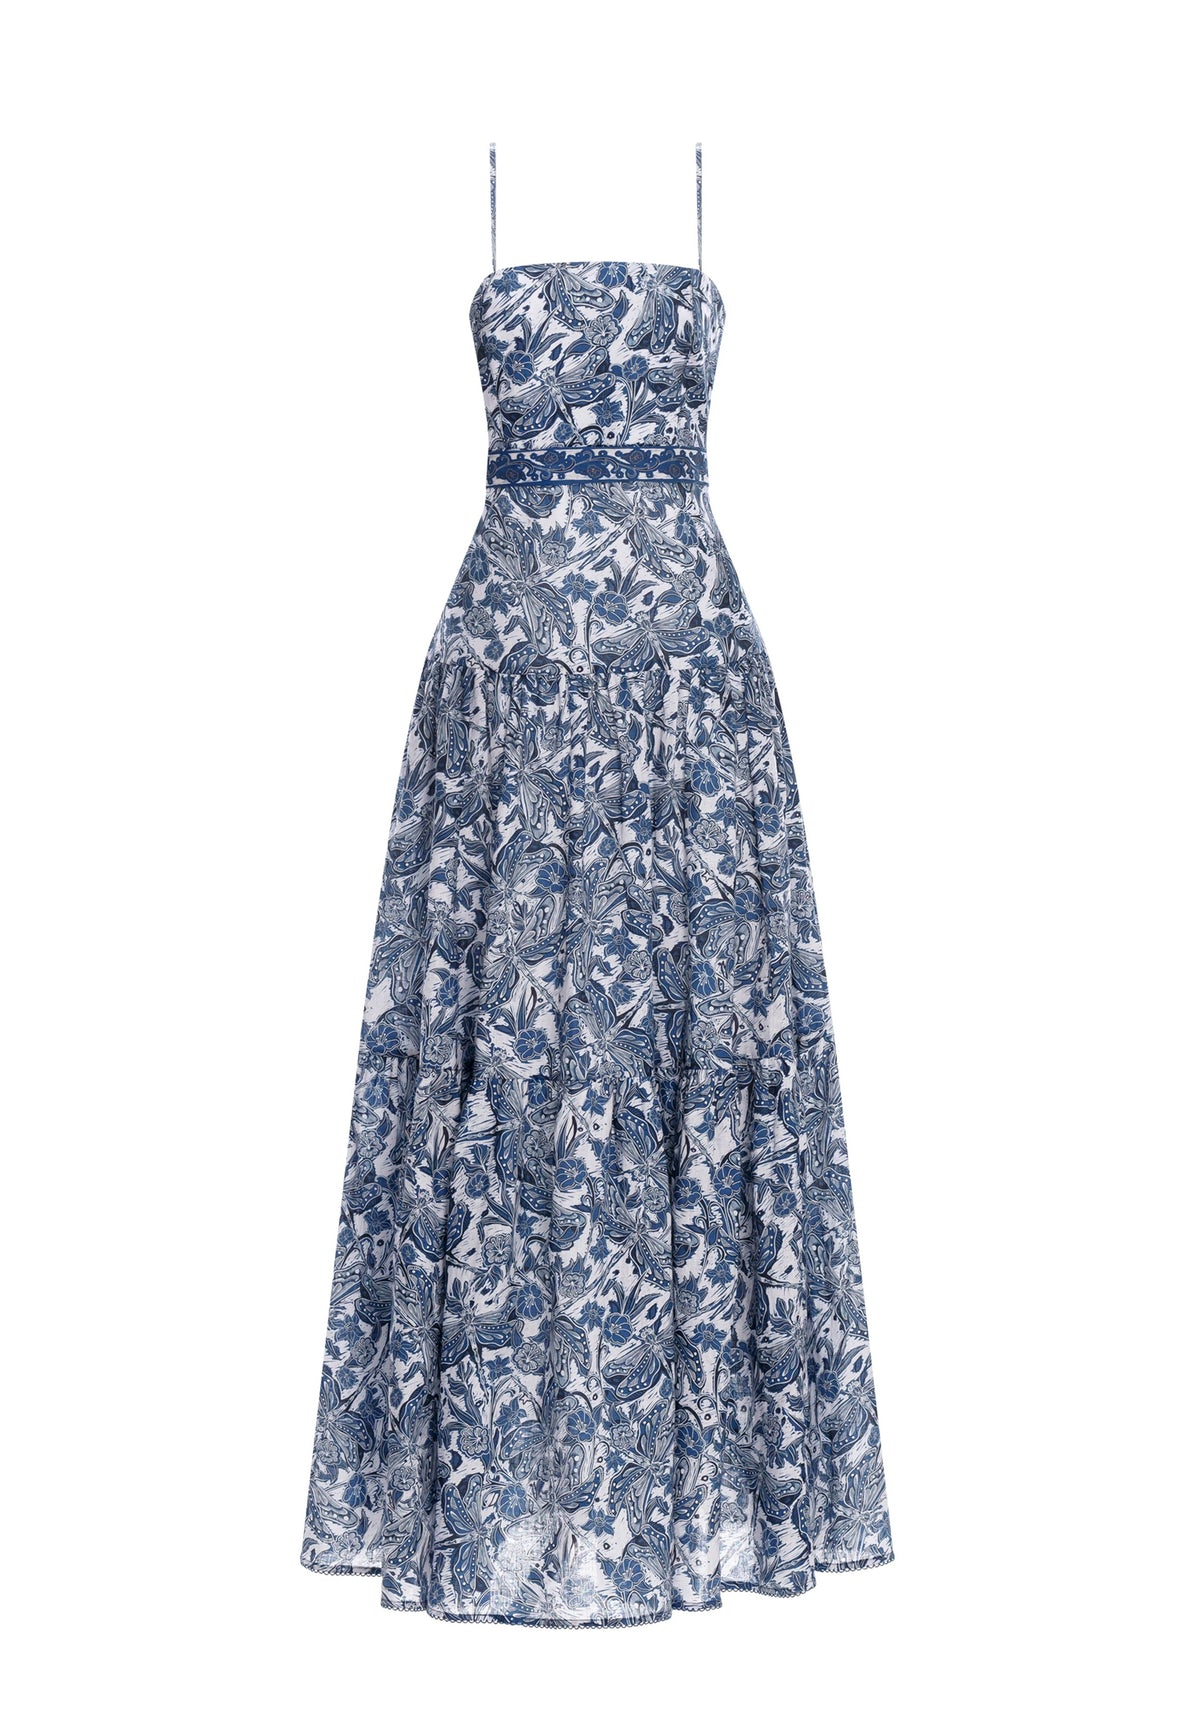 Lima Printed Maxi Dress in Blue Dragonfly Print